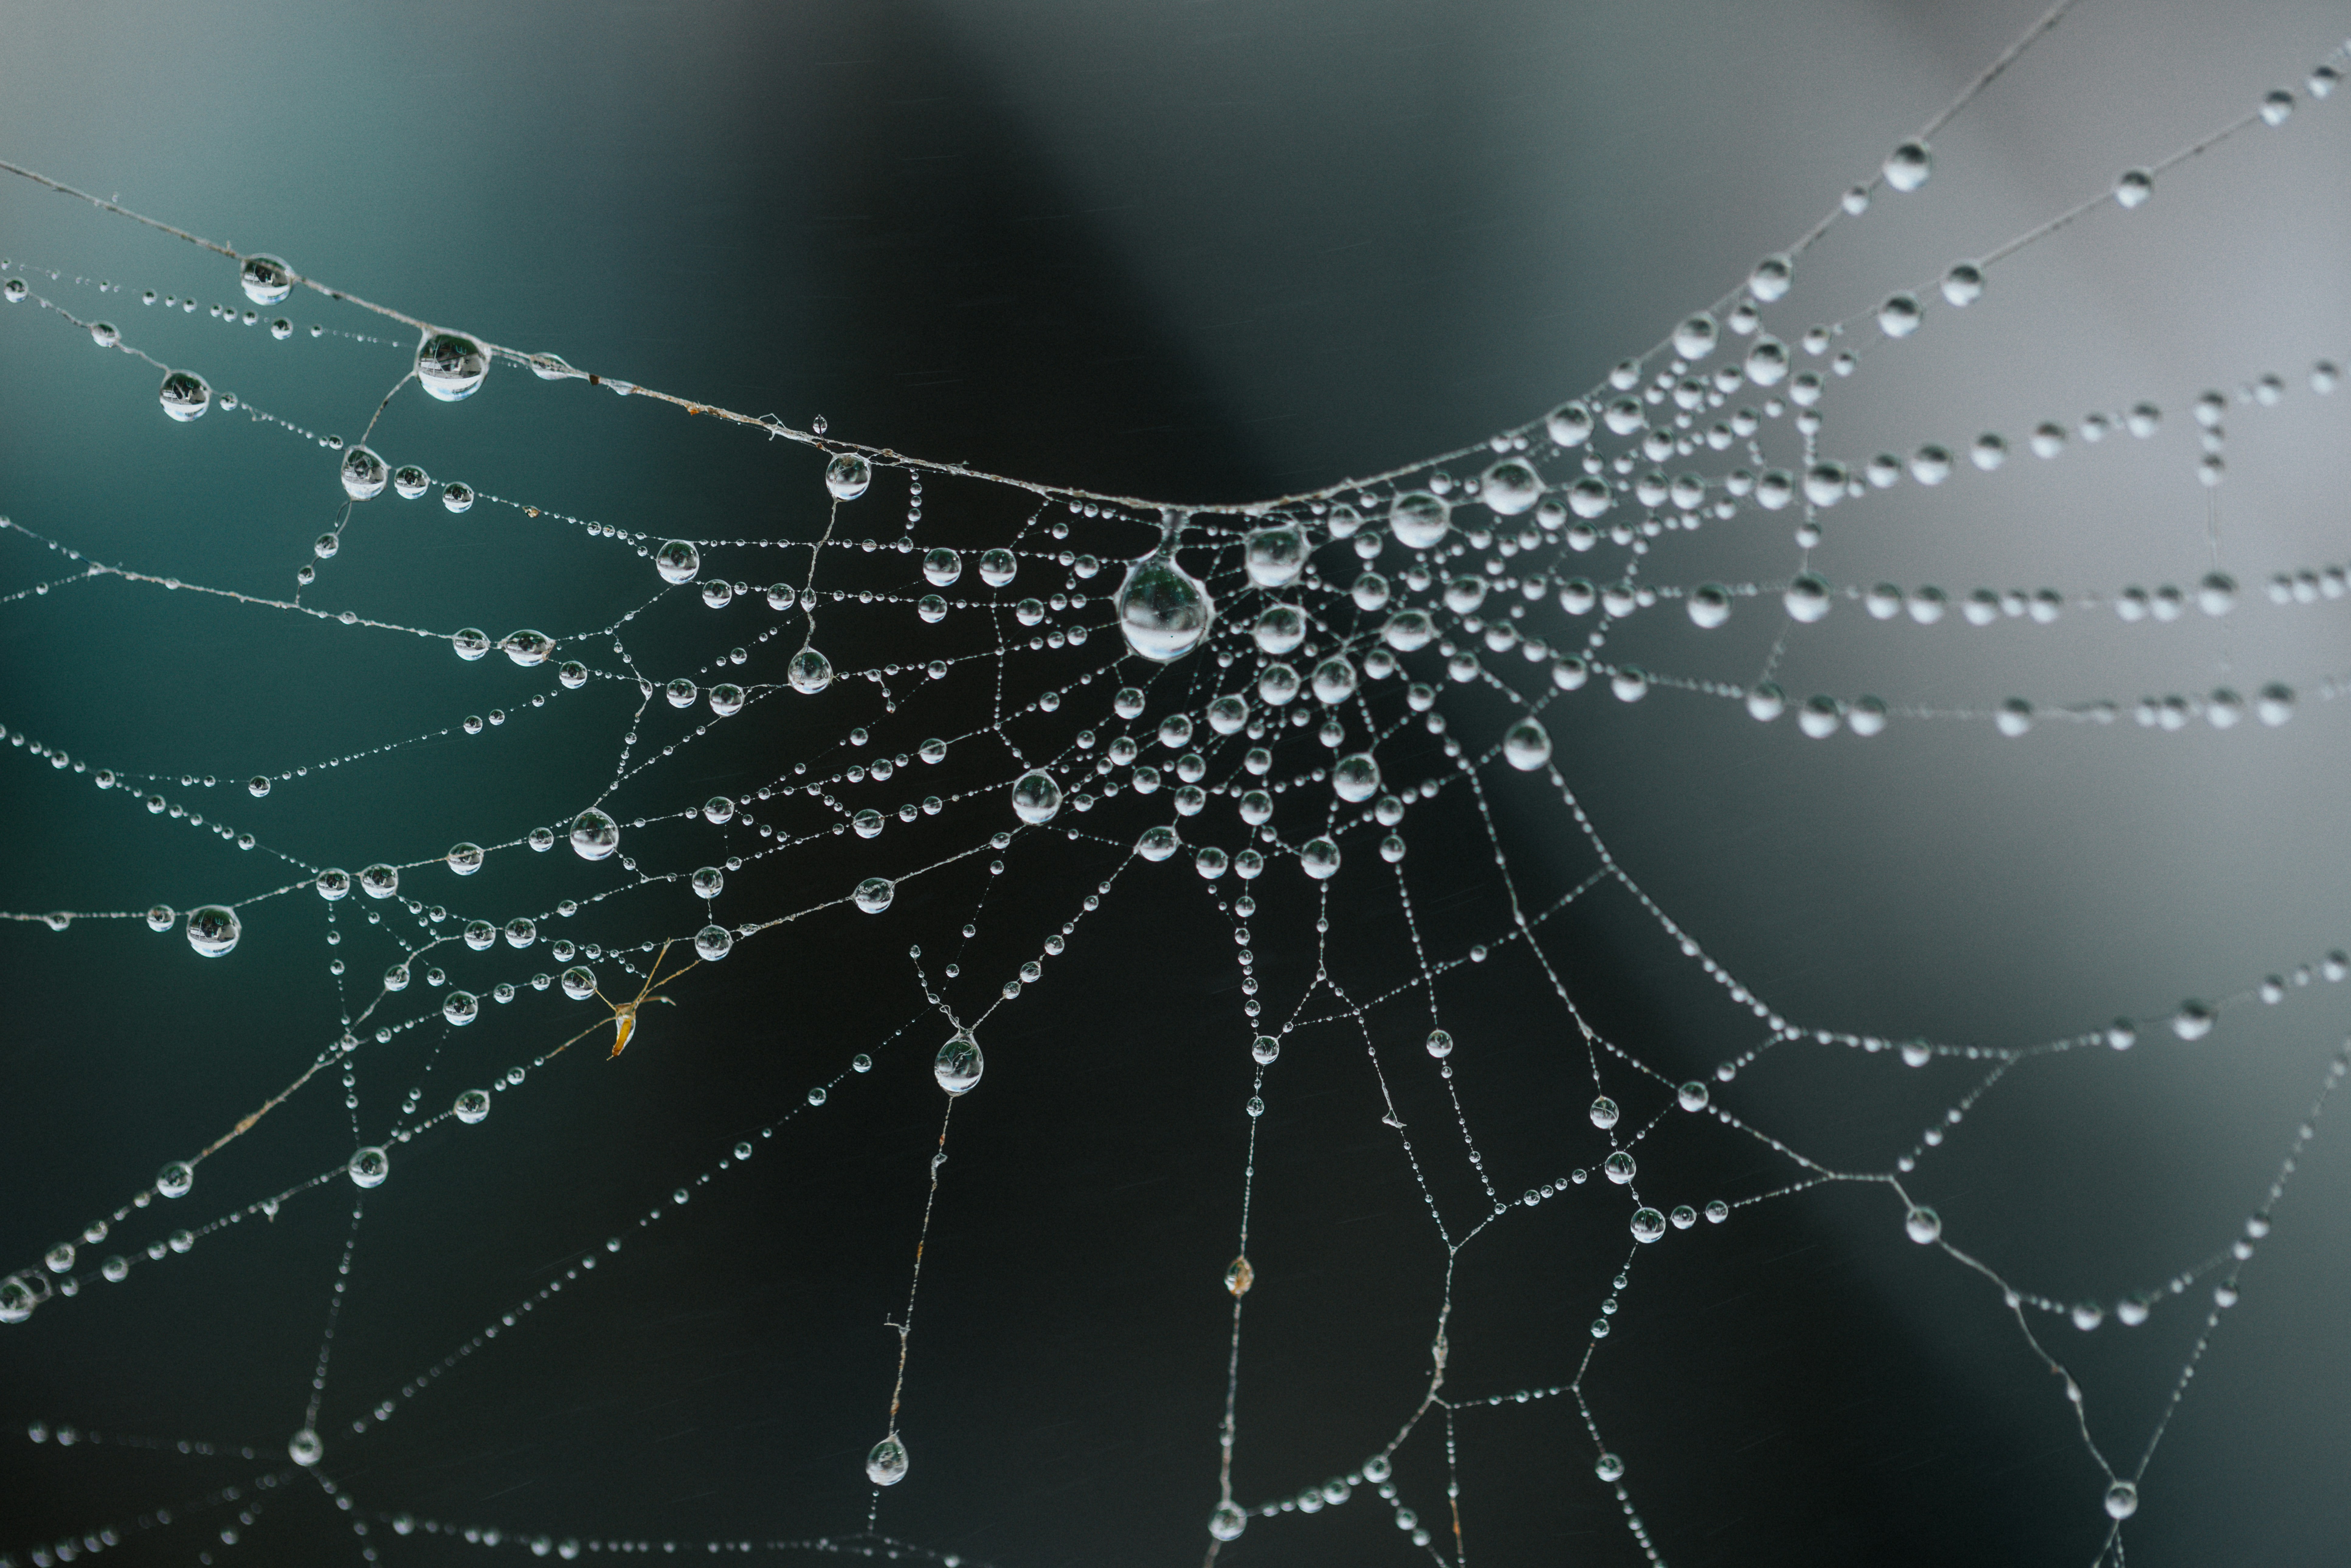 spiderweb with water droplets